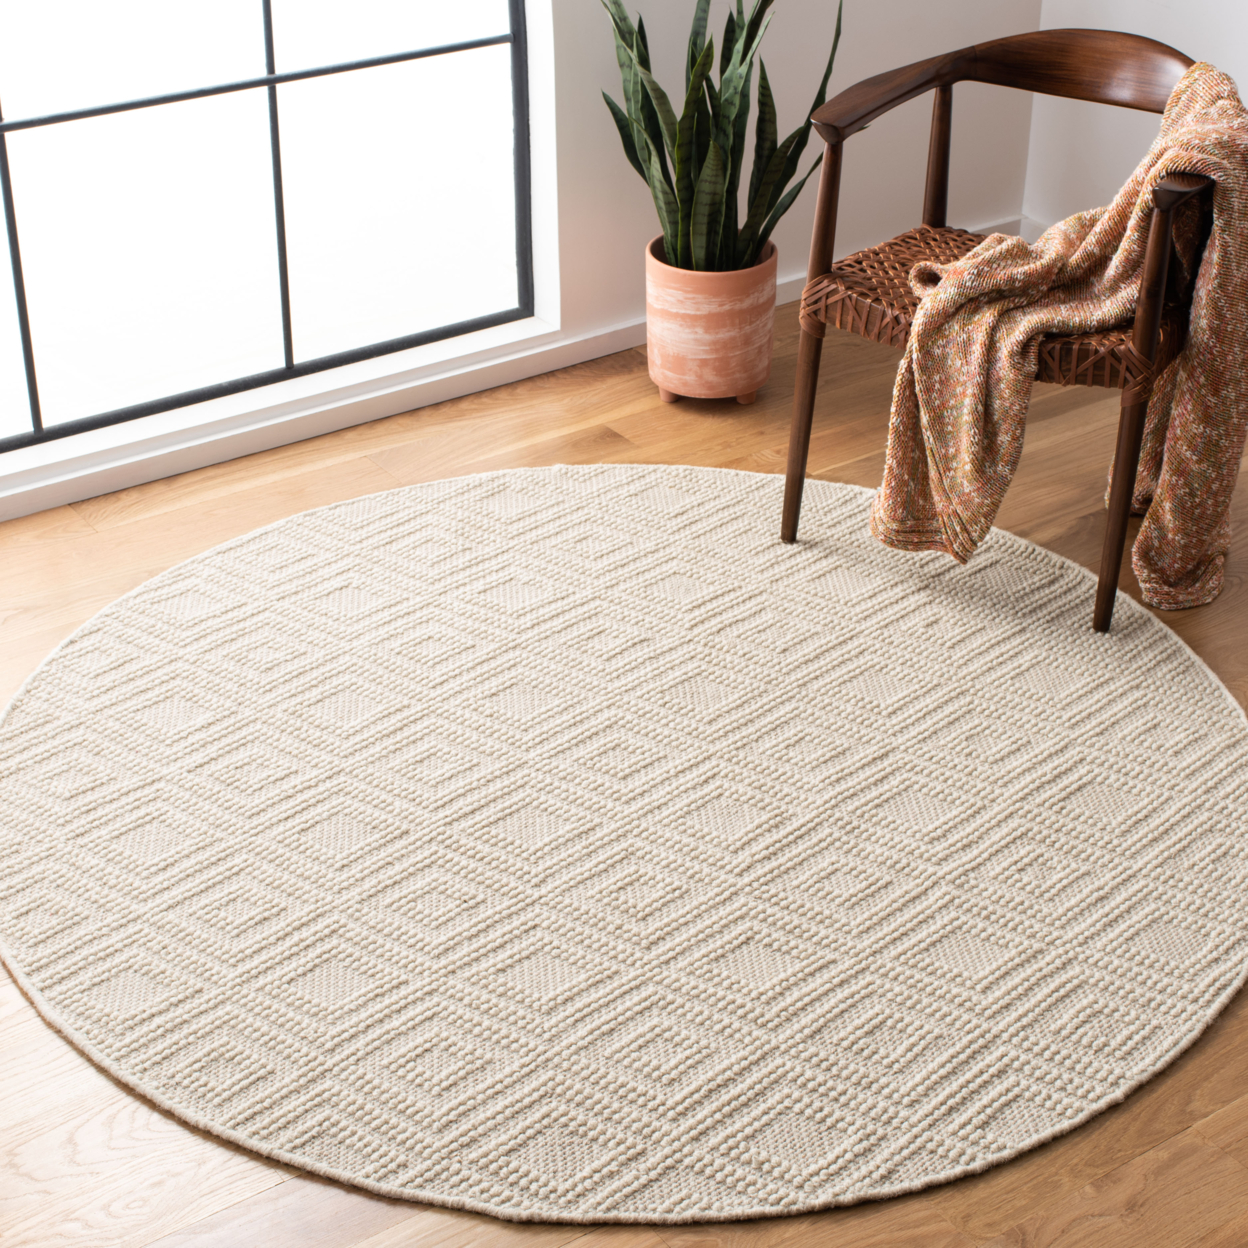 SAFAVIEH Vermont Collection VRM212A Handwoven Ivory Rug - 2' 3 X 14'